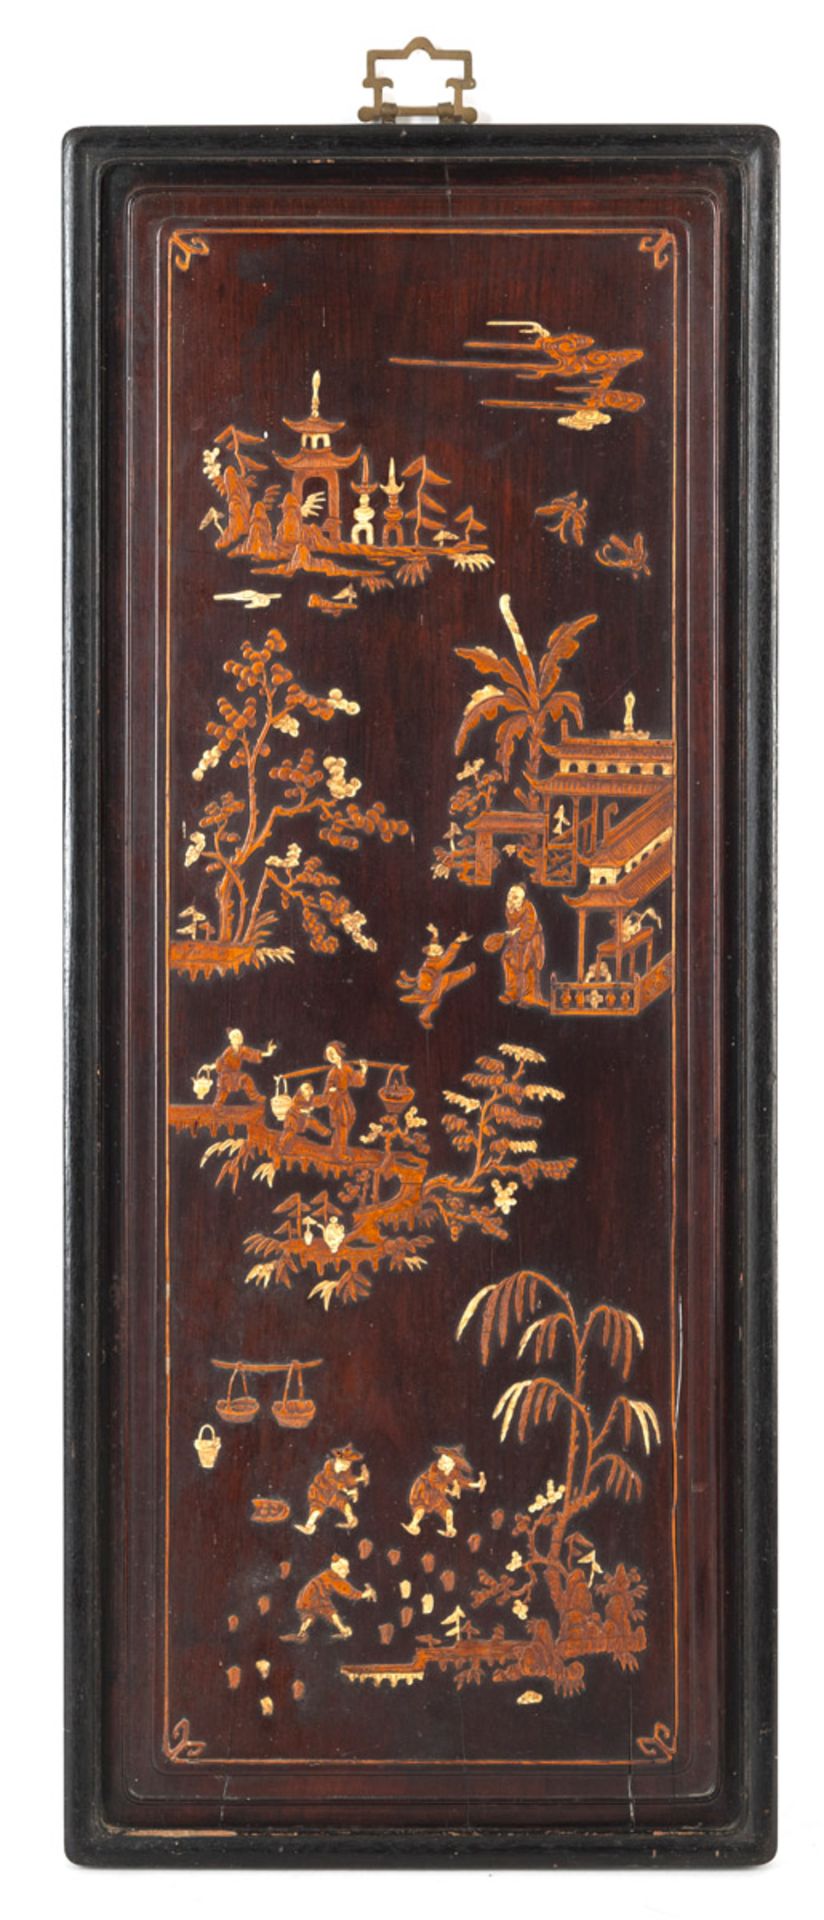 A WOOD PANEL WITH RELIEF BOXWOOD CARVING OF FIGURAL SCENES